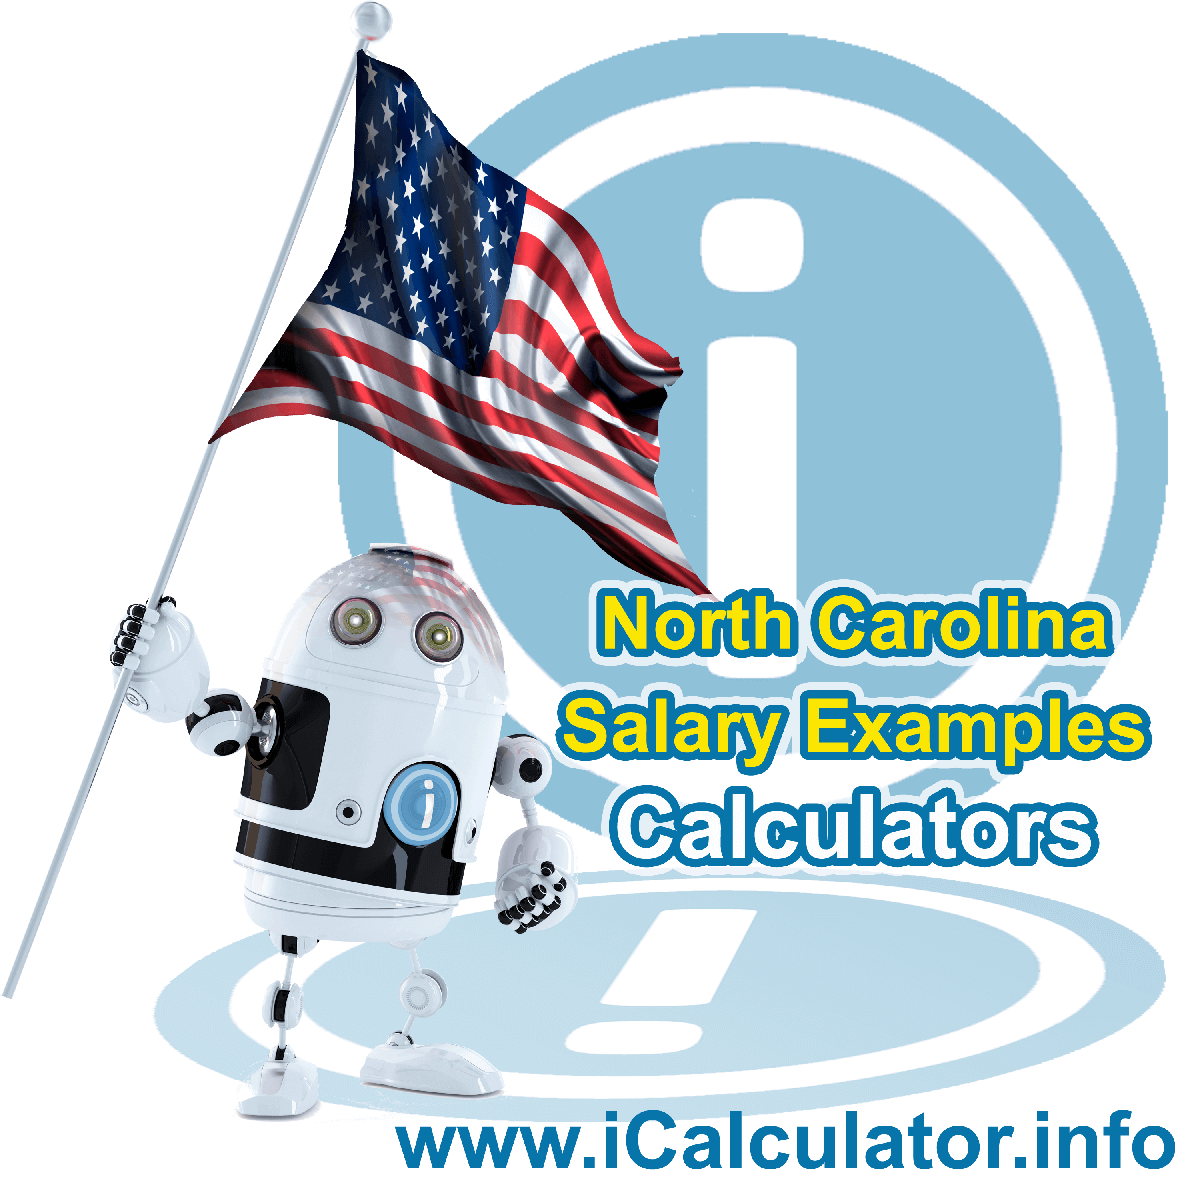 North Carolina Salary Example for $ 10,000.00 in 2023 | iCalculator™ | $ 10,000.00 salary example for employee and employer paying North Carolina State tincome taxes. Detailed salary after tax calculation including North Carolina State Tax, Federal State Tax, Medicare Deductions, Social Security, Capital Gains and other income tax and salary deductions complete with supporting North Carolina state tax tables 